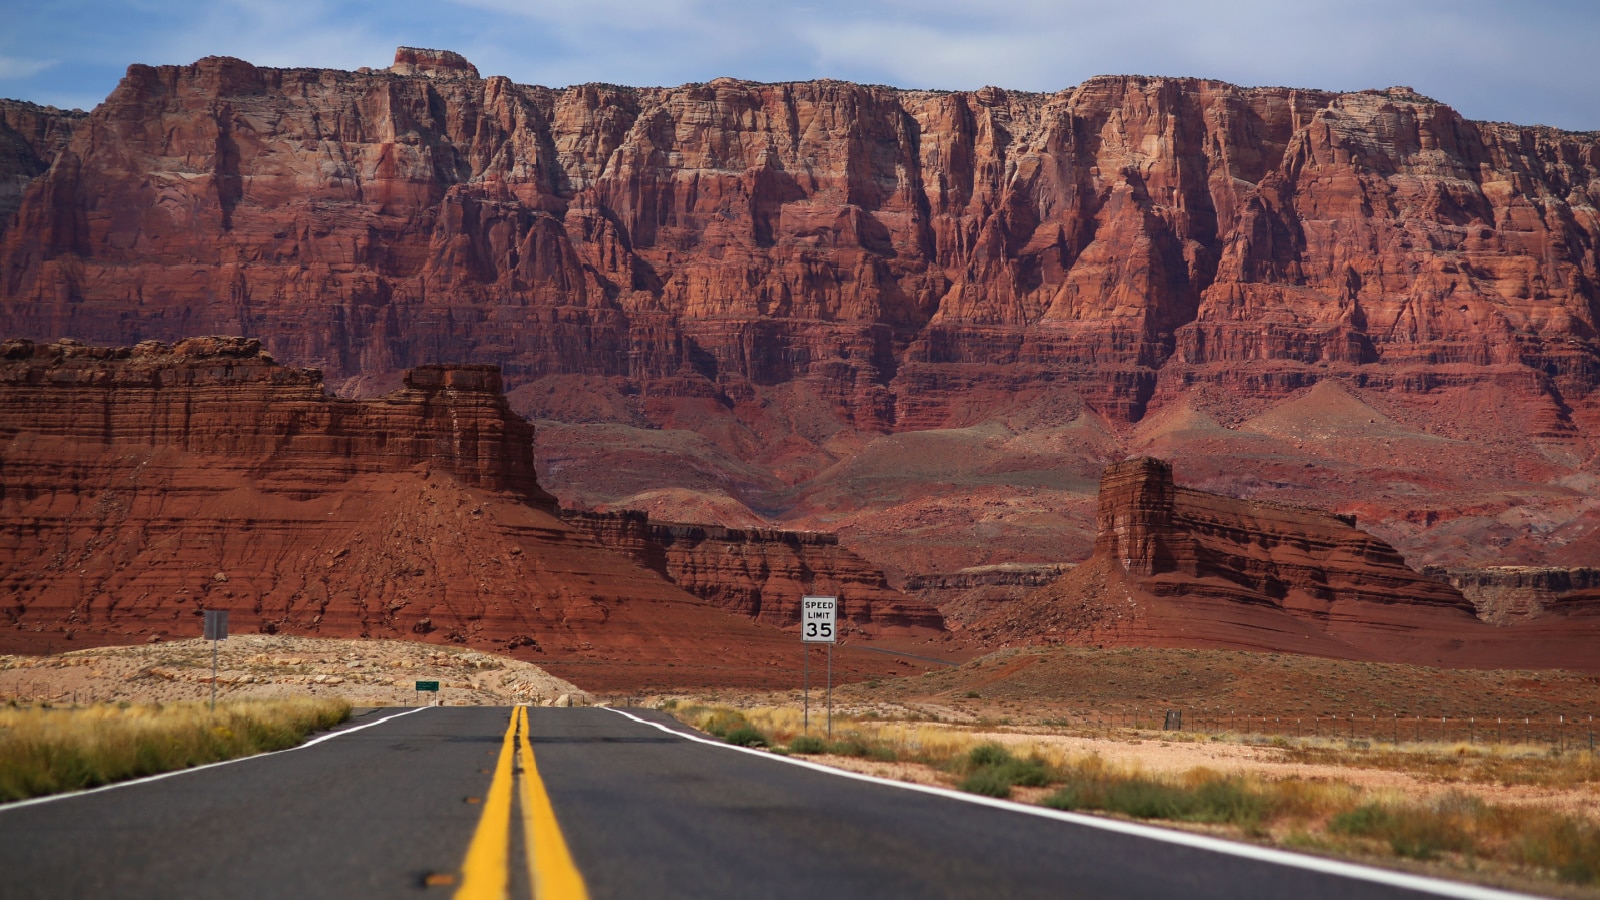 Road with the yellow divider lines leading to red rocks formations in Arizona